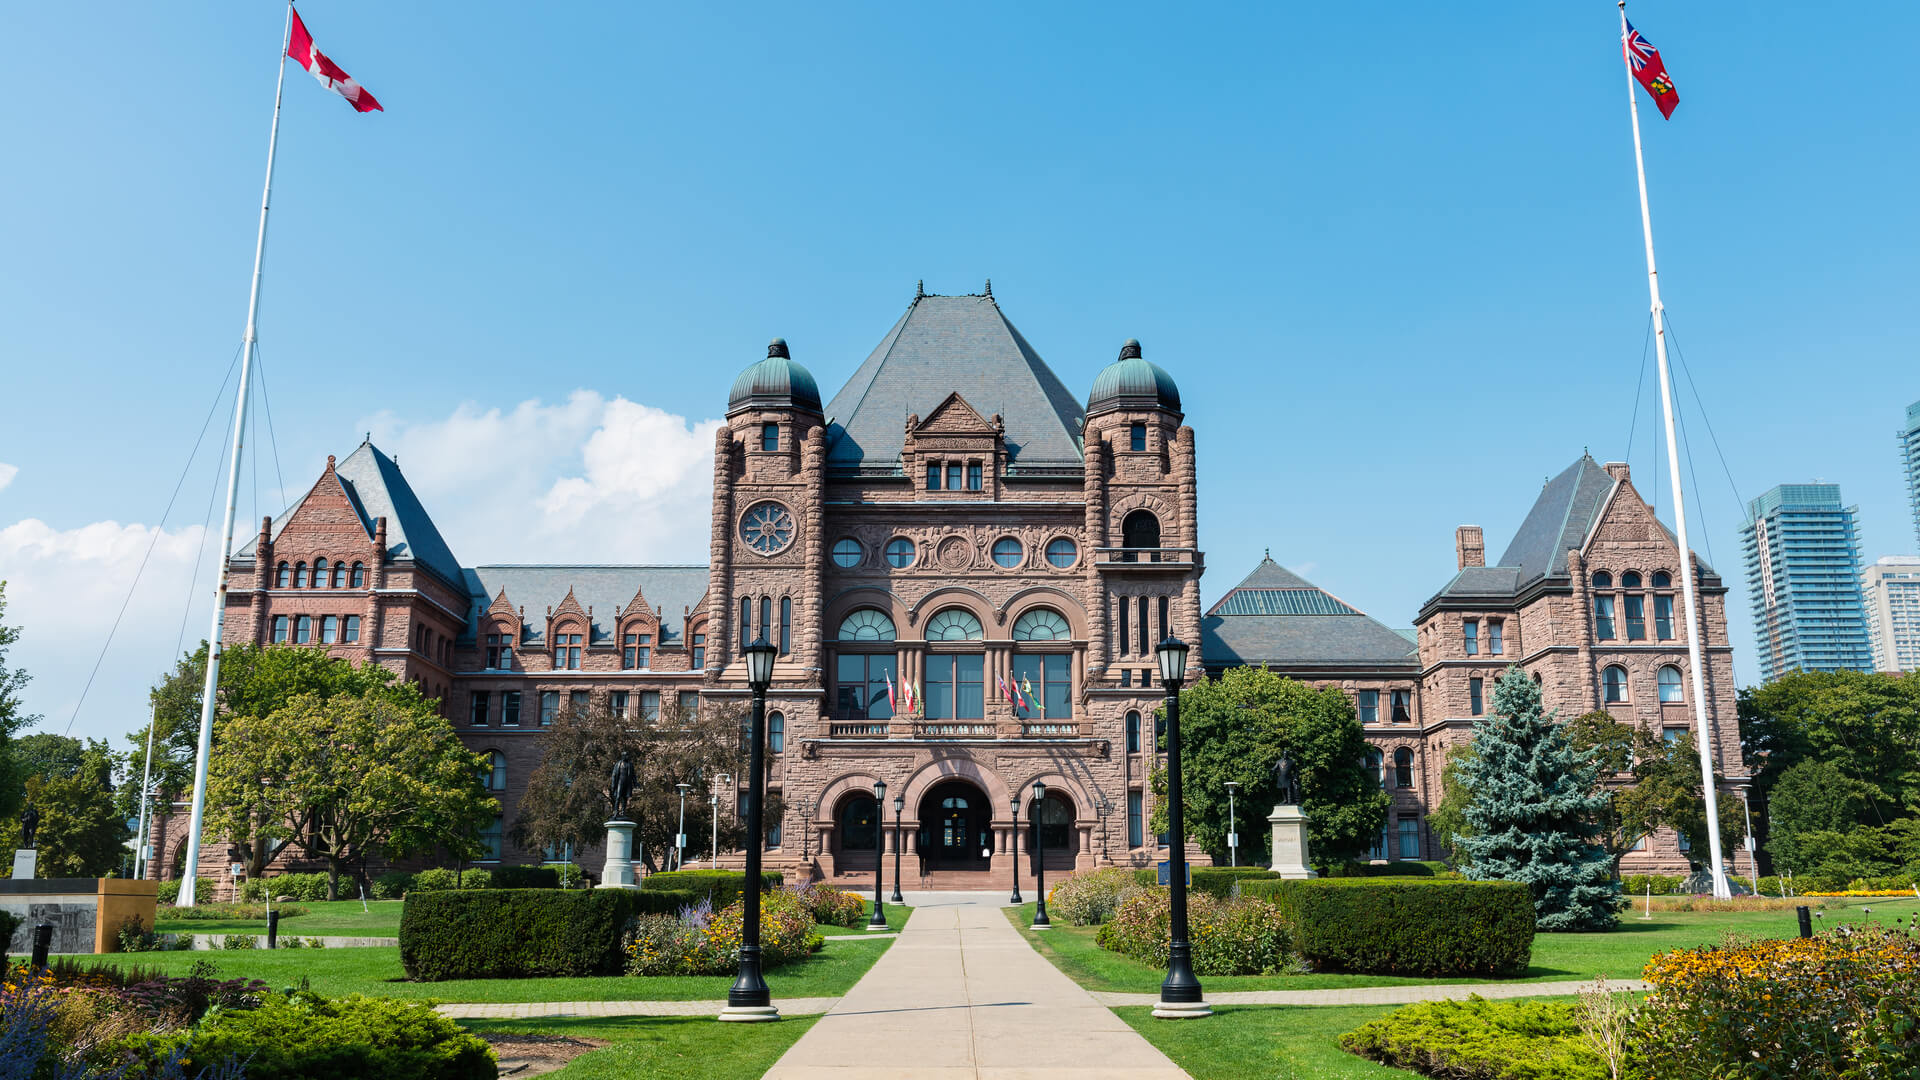 The Legislative Assembly of Ontario at Queens park on a sunny day